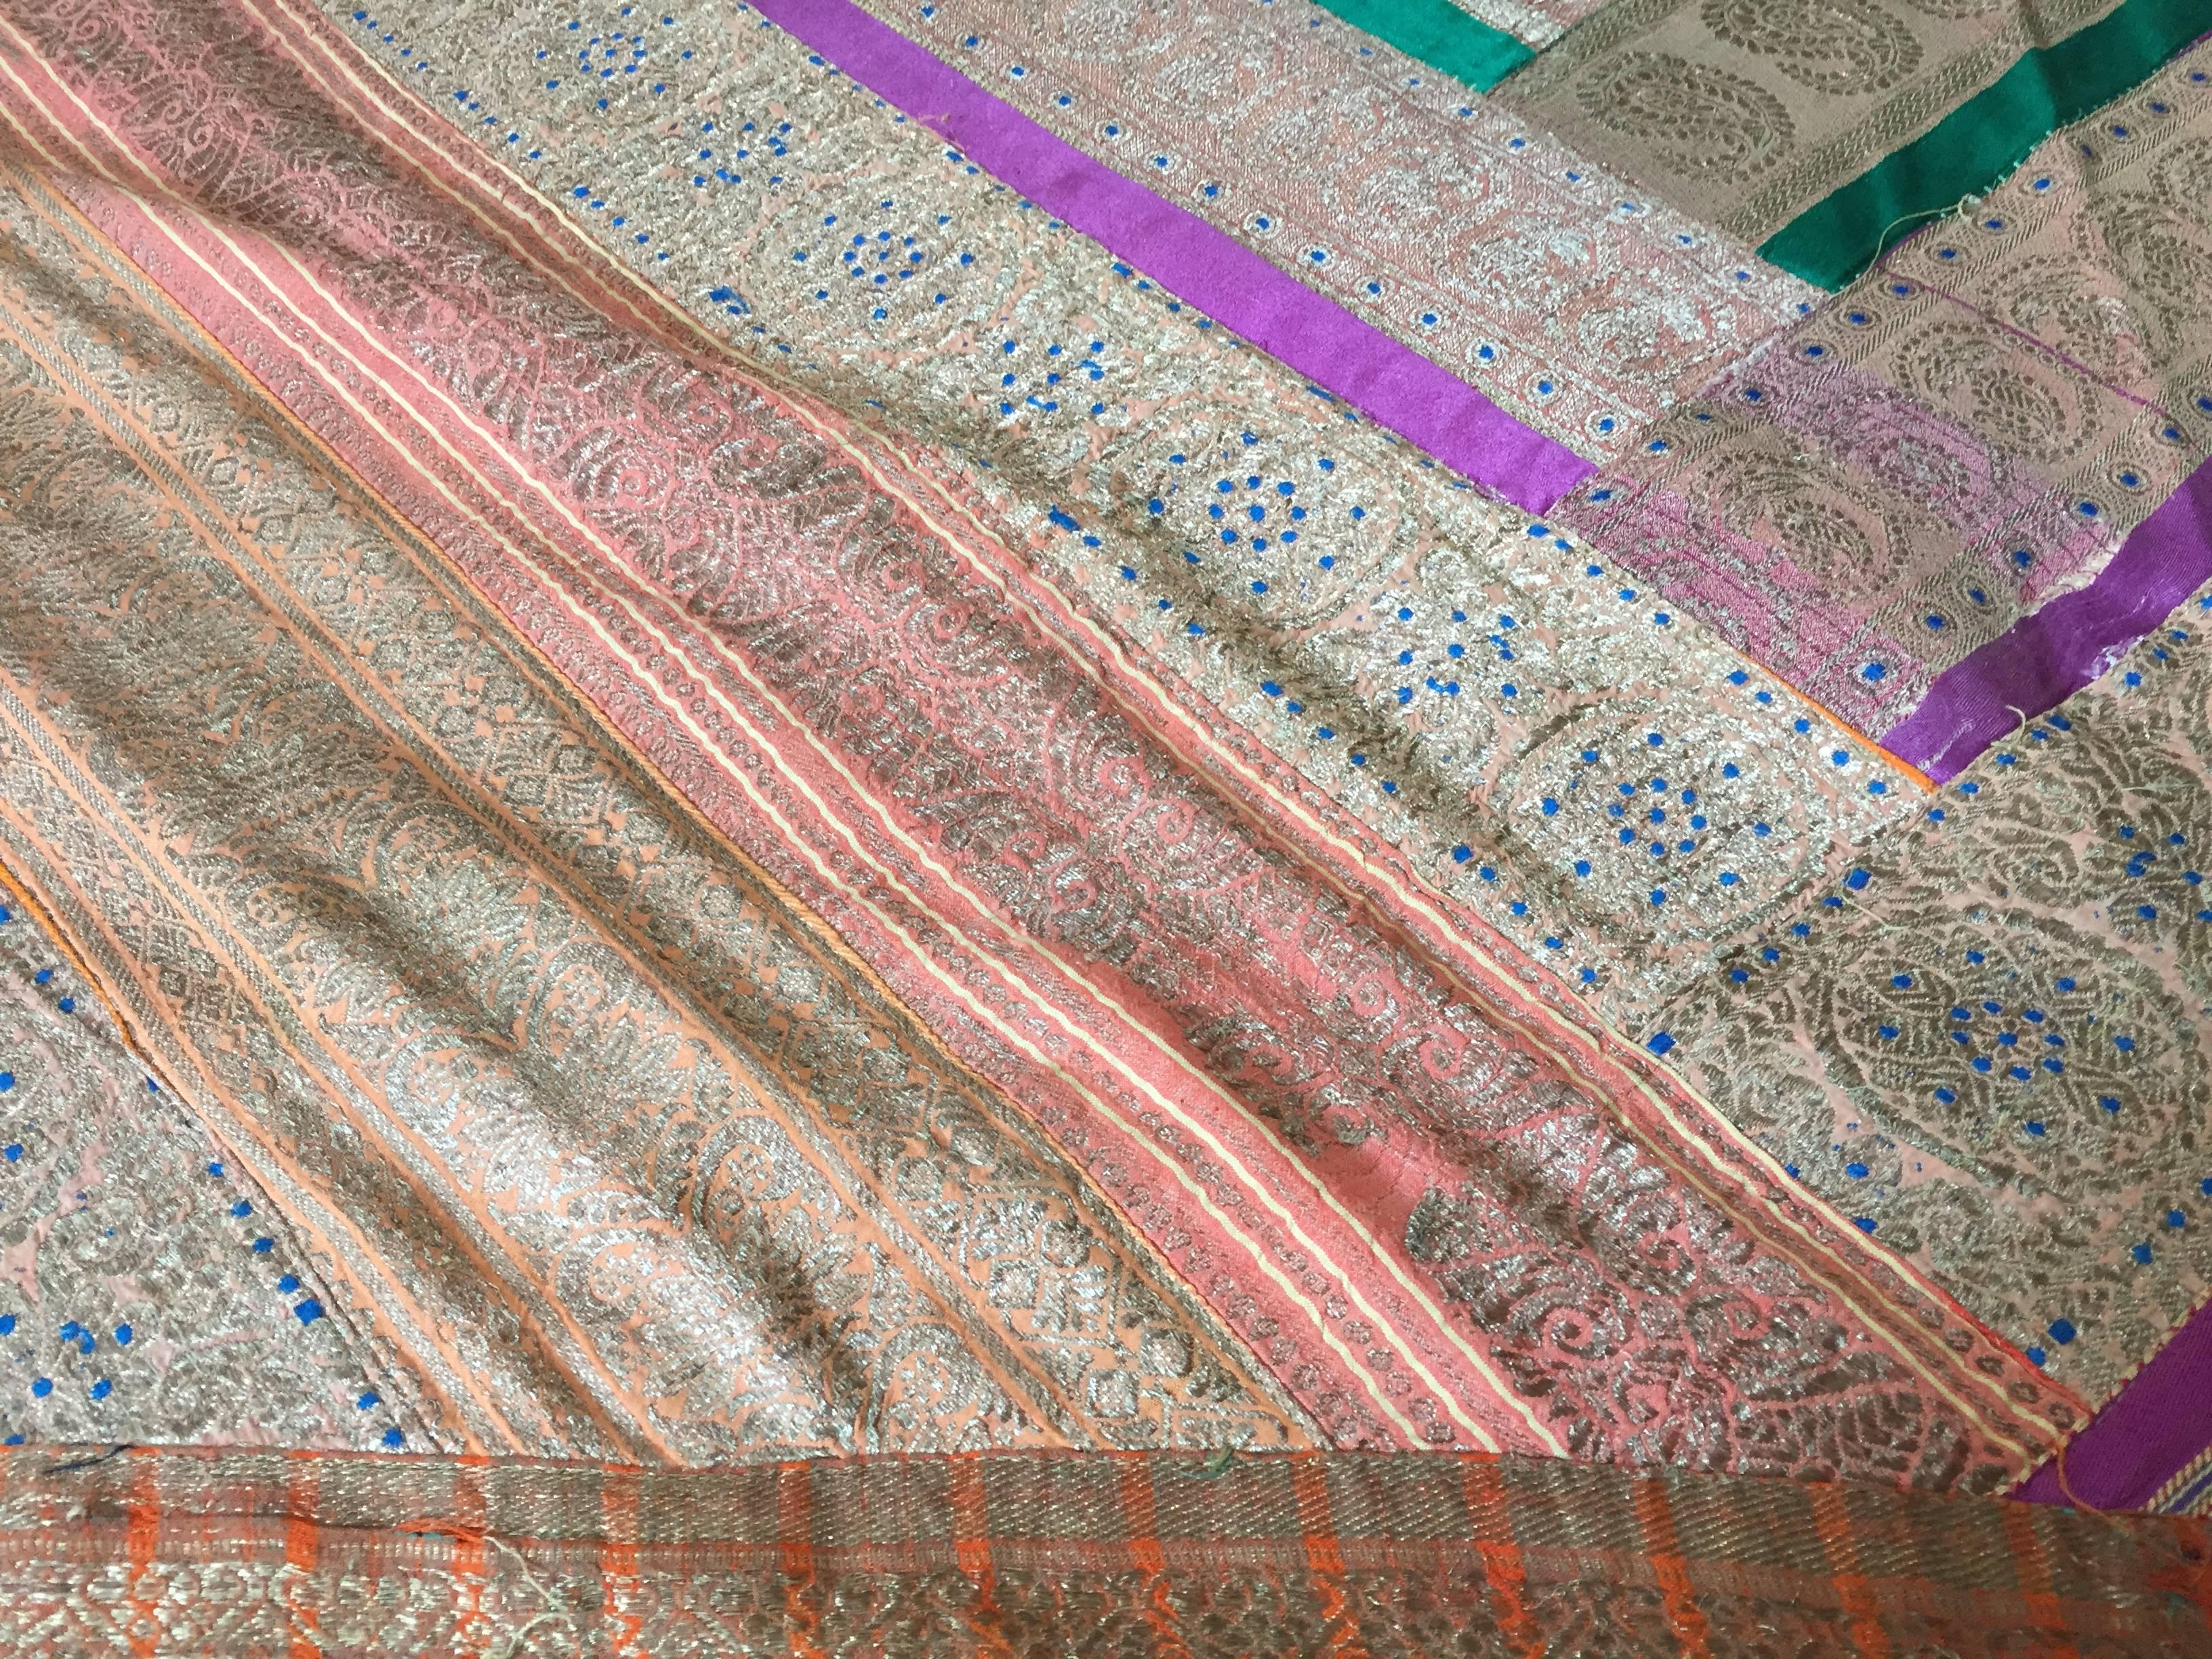 1950s Vintage Silk Sari Textile Quilt Patchwork, India In Good Condition For Sale In North Hollywood, CA